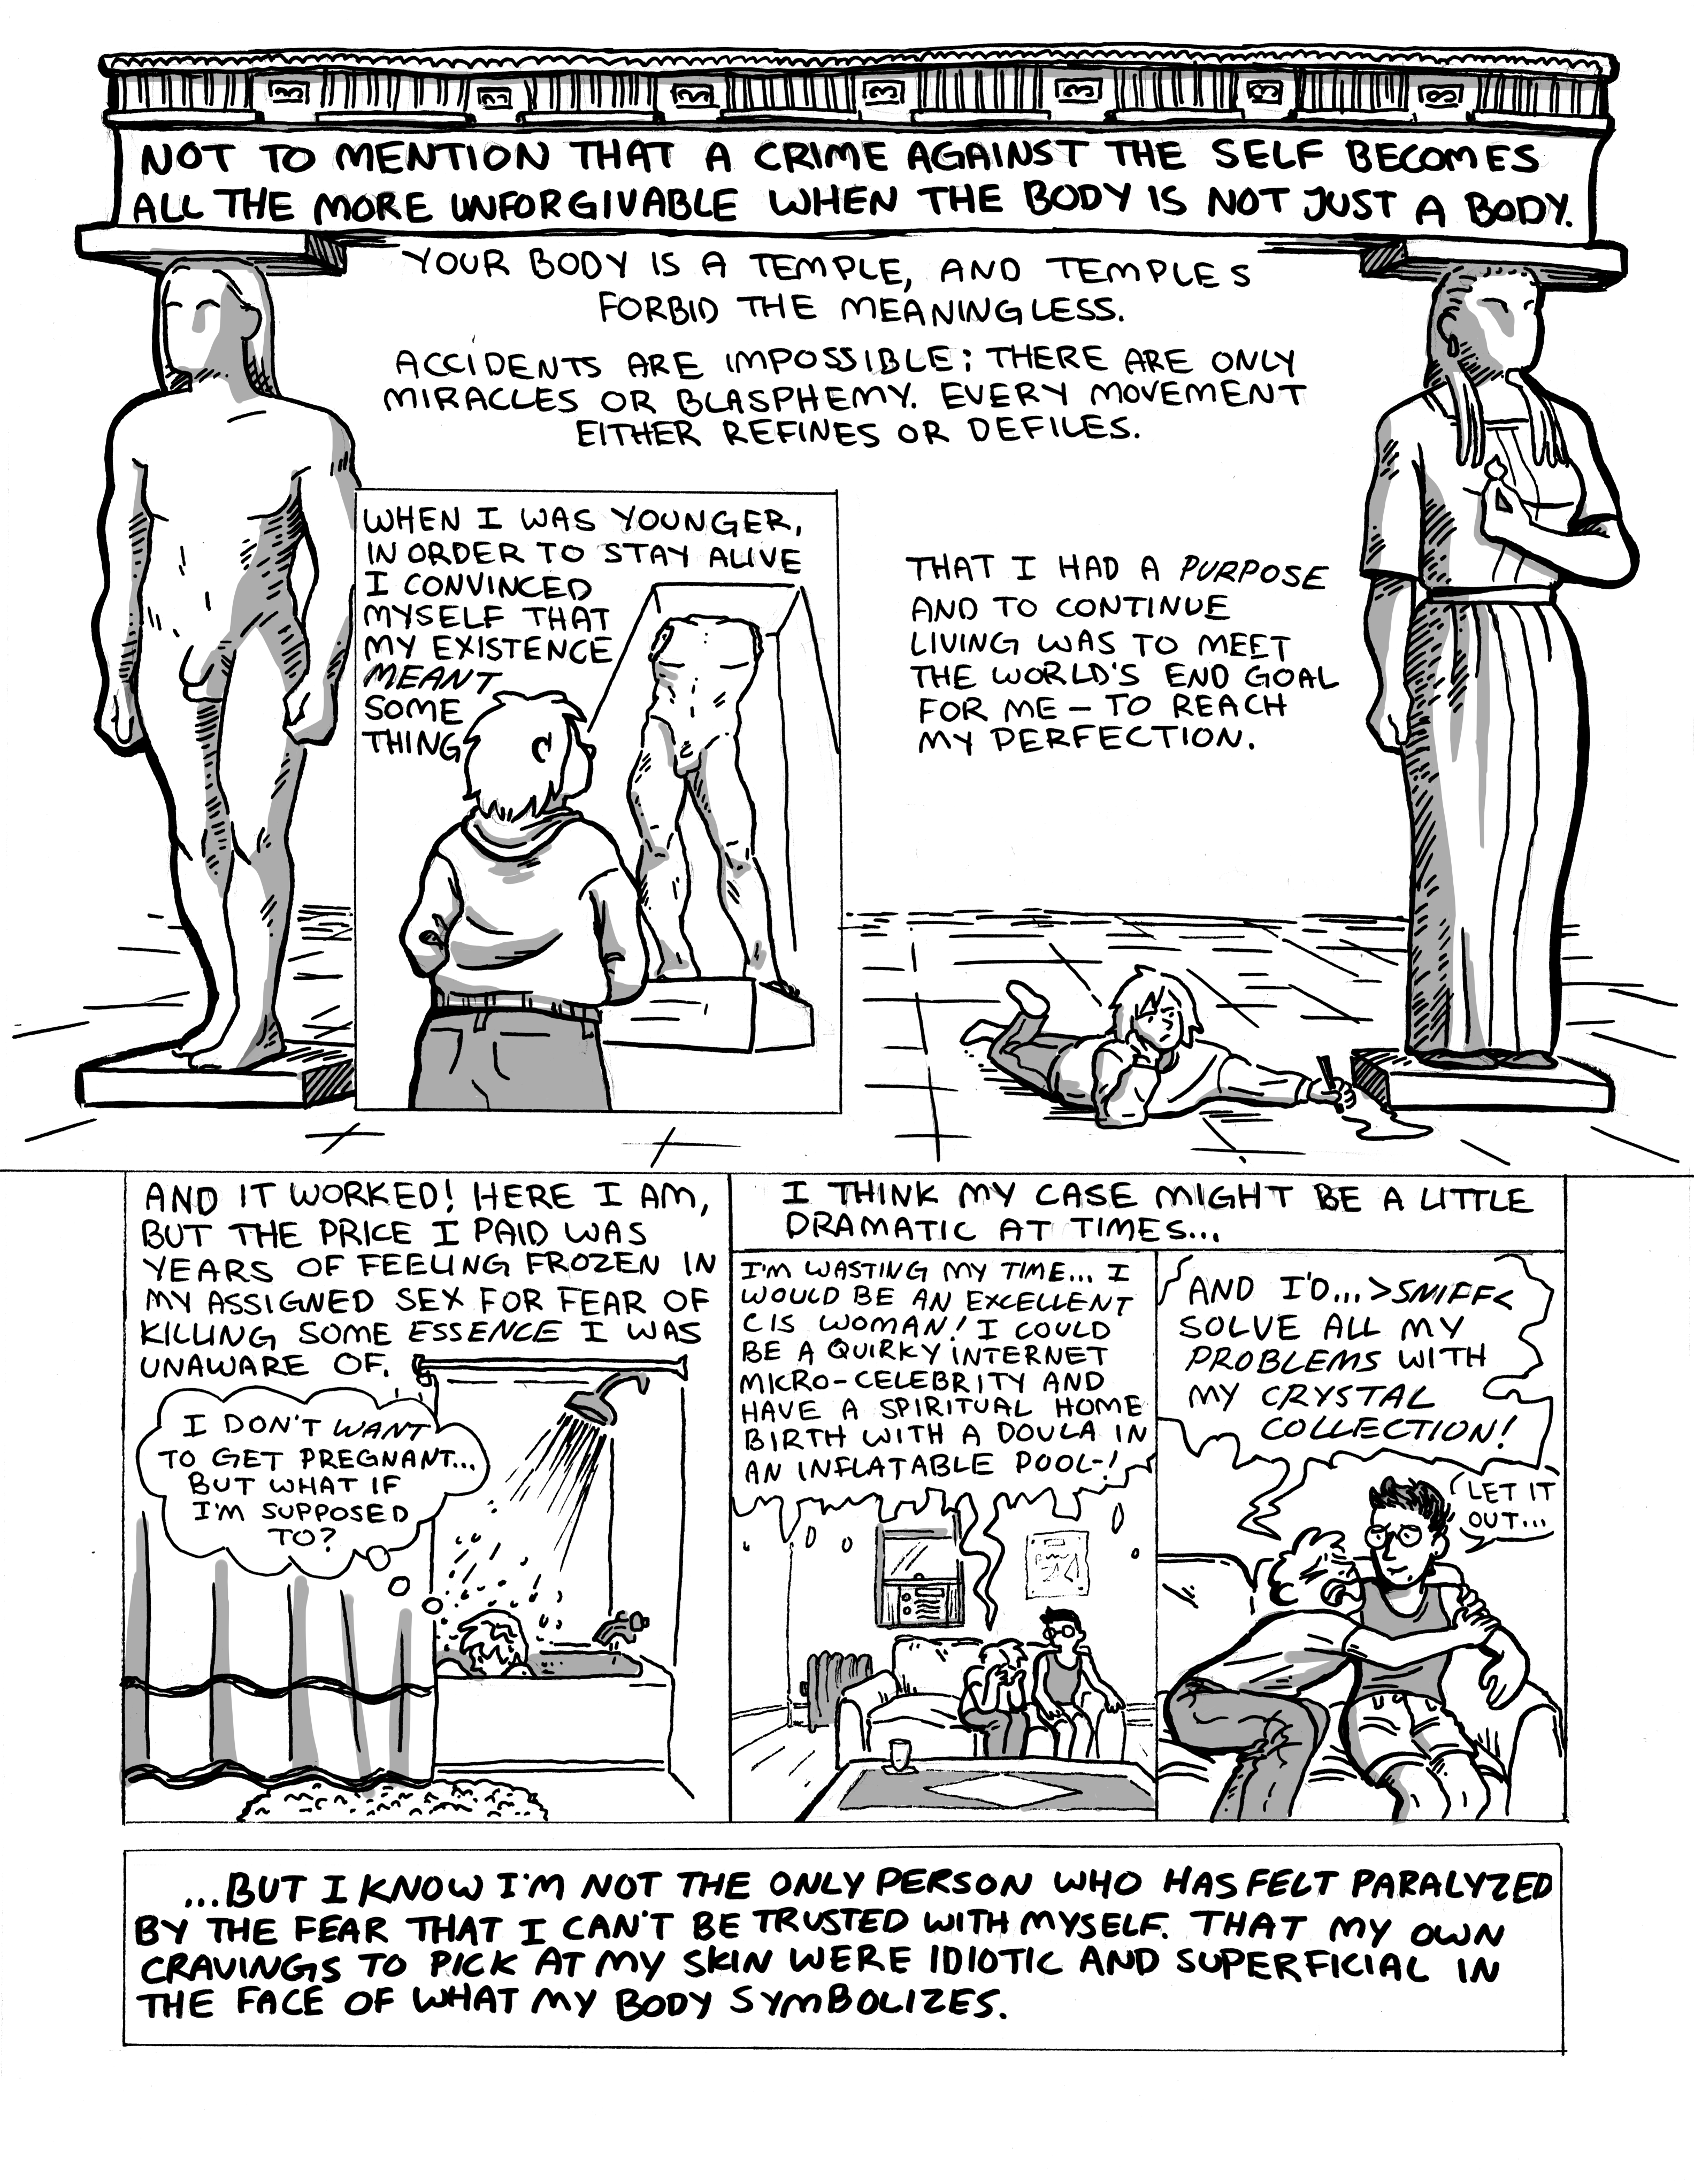 Excerpt from <i>The Comic that Defends Self Harm</i>, a short comic soon to be published in World War 3 Illustrated